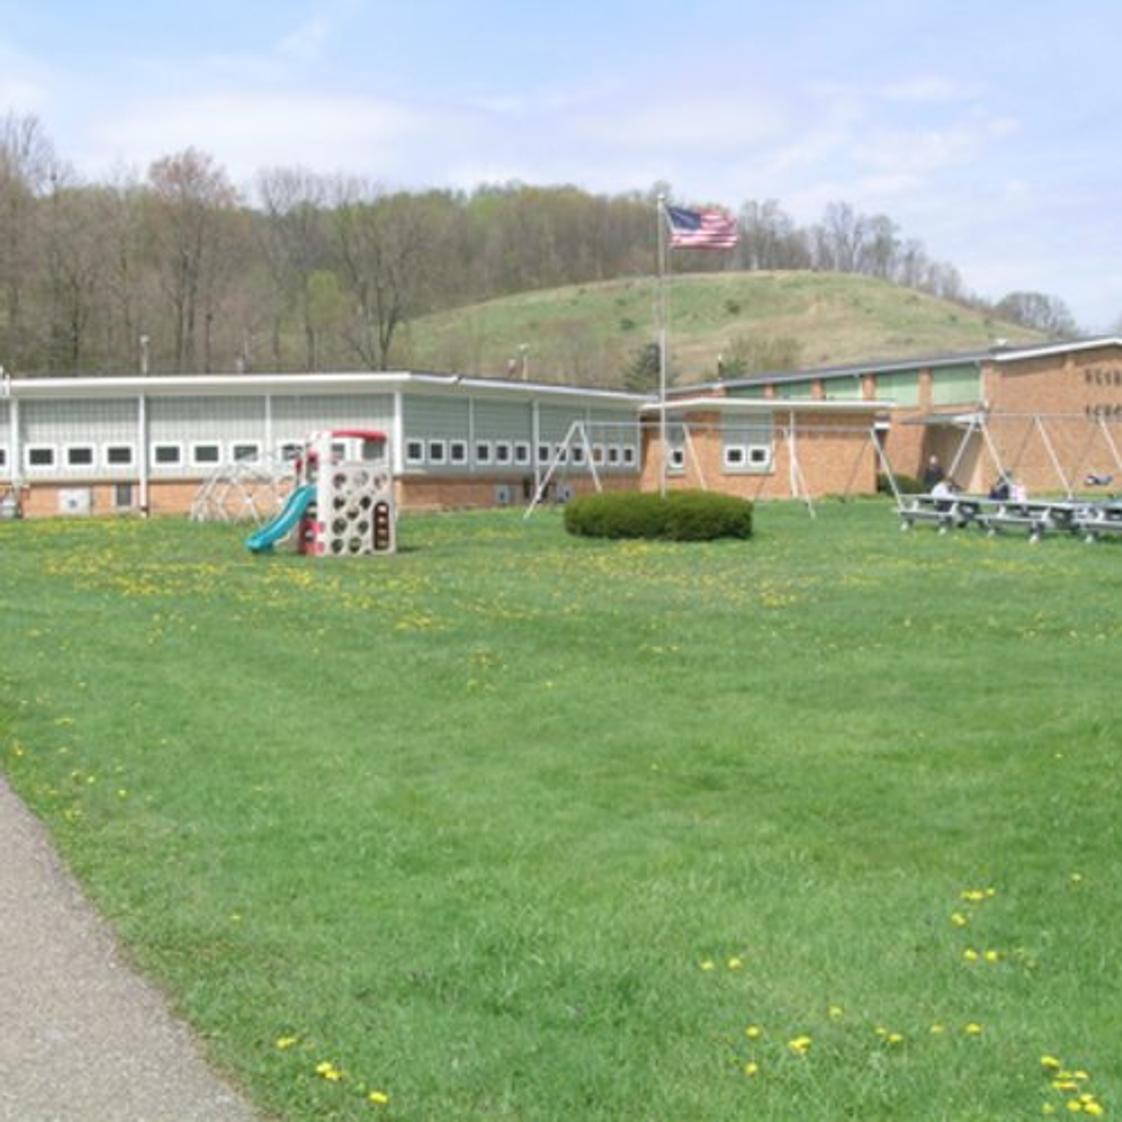 Rush Christian School Photo #1 - The rural setting is emphasized in the spring photo of the school.